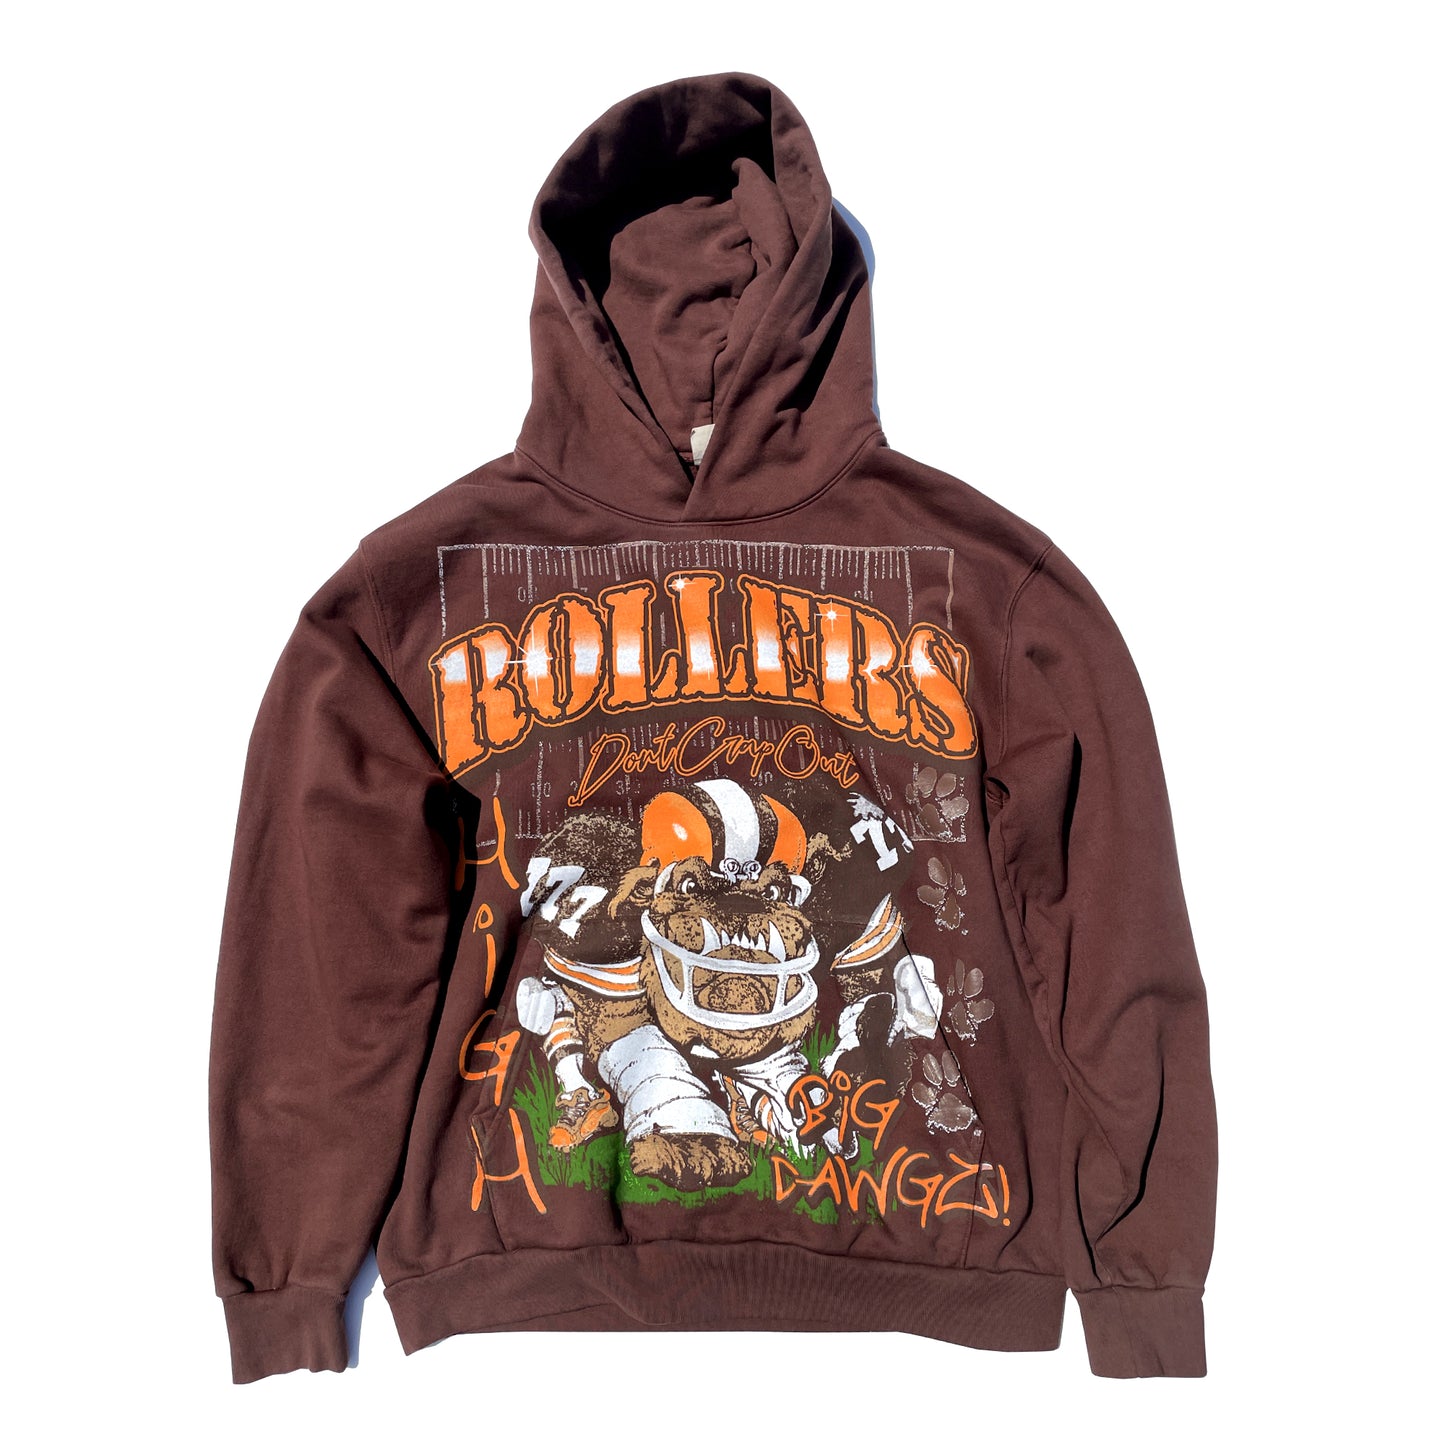 High Rollers- Touchdown Hoodie